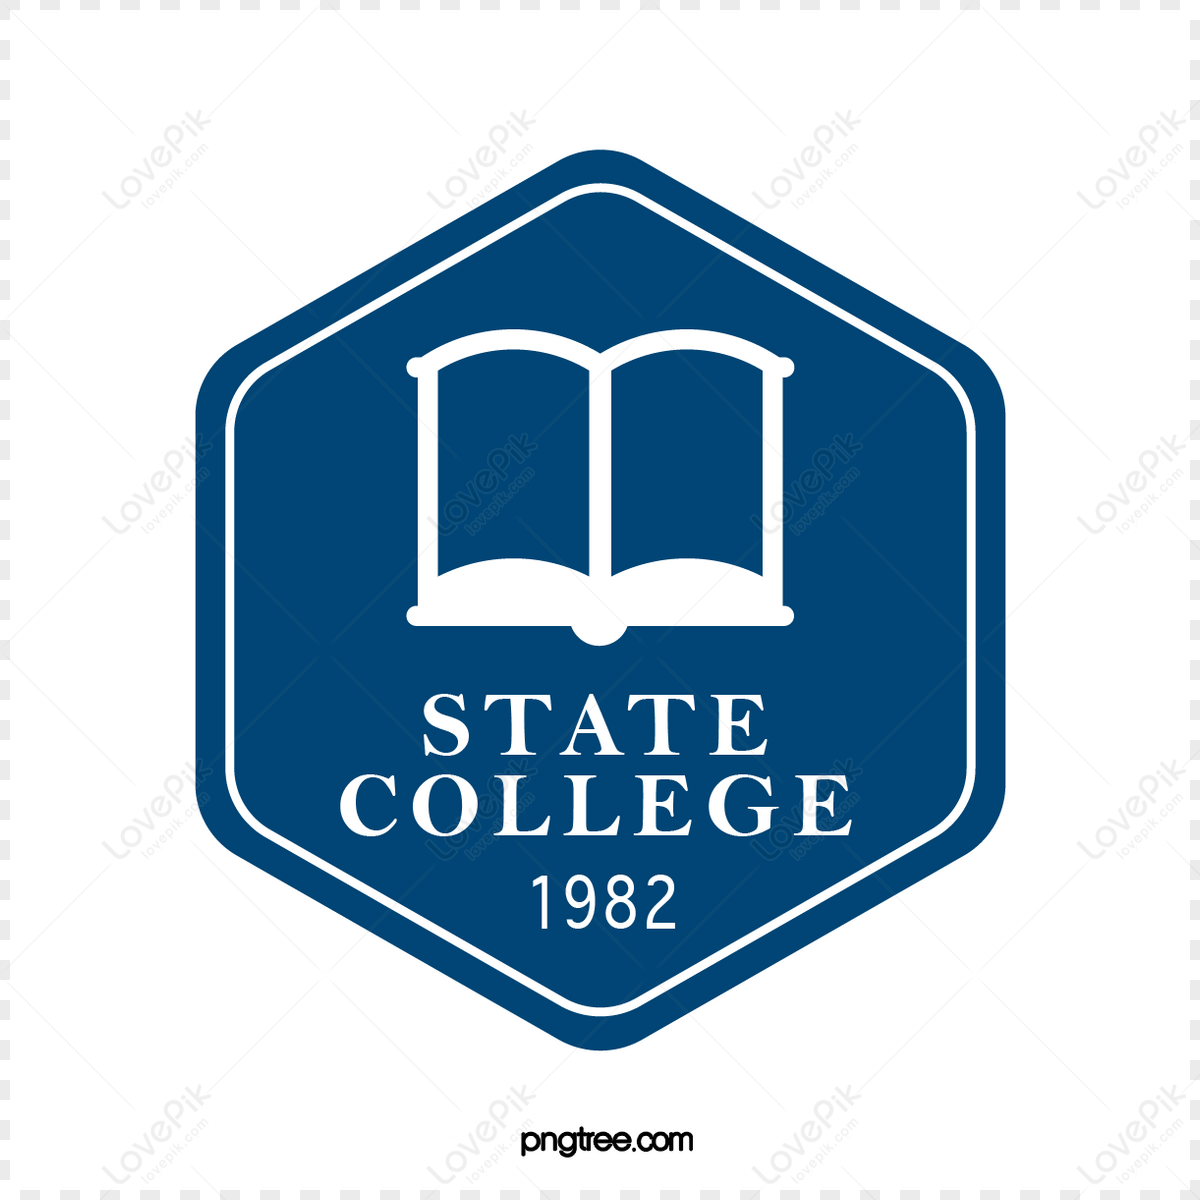 Education Vector Logo Template Open Book And Human Education Logo Open Book  Stock Illustration - Download Image Now - iStock